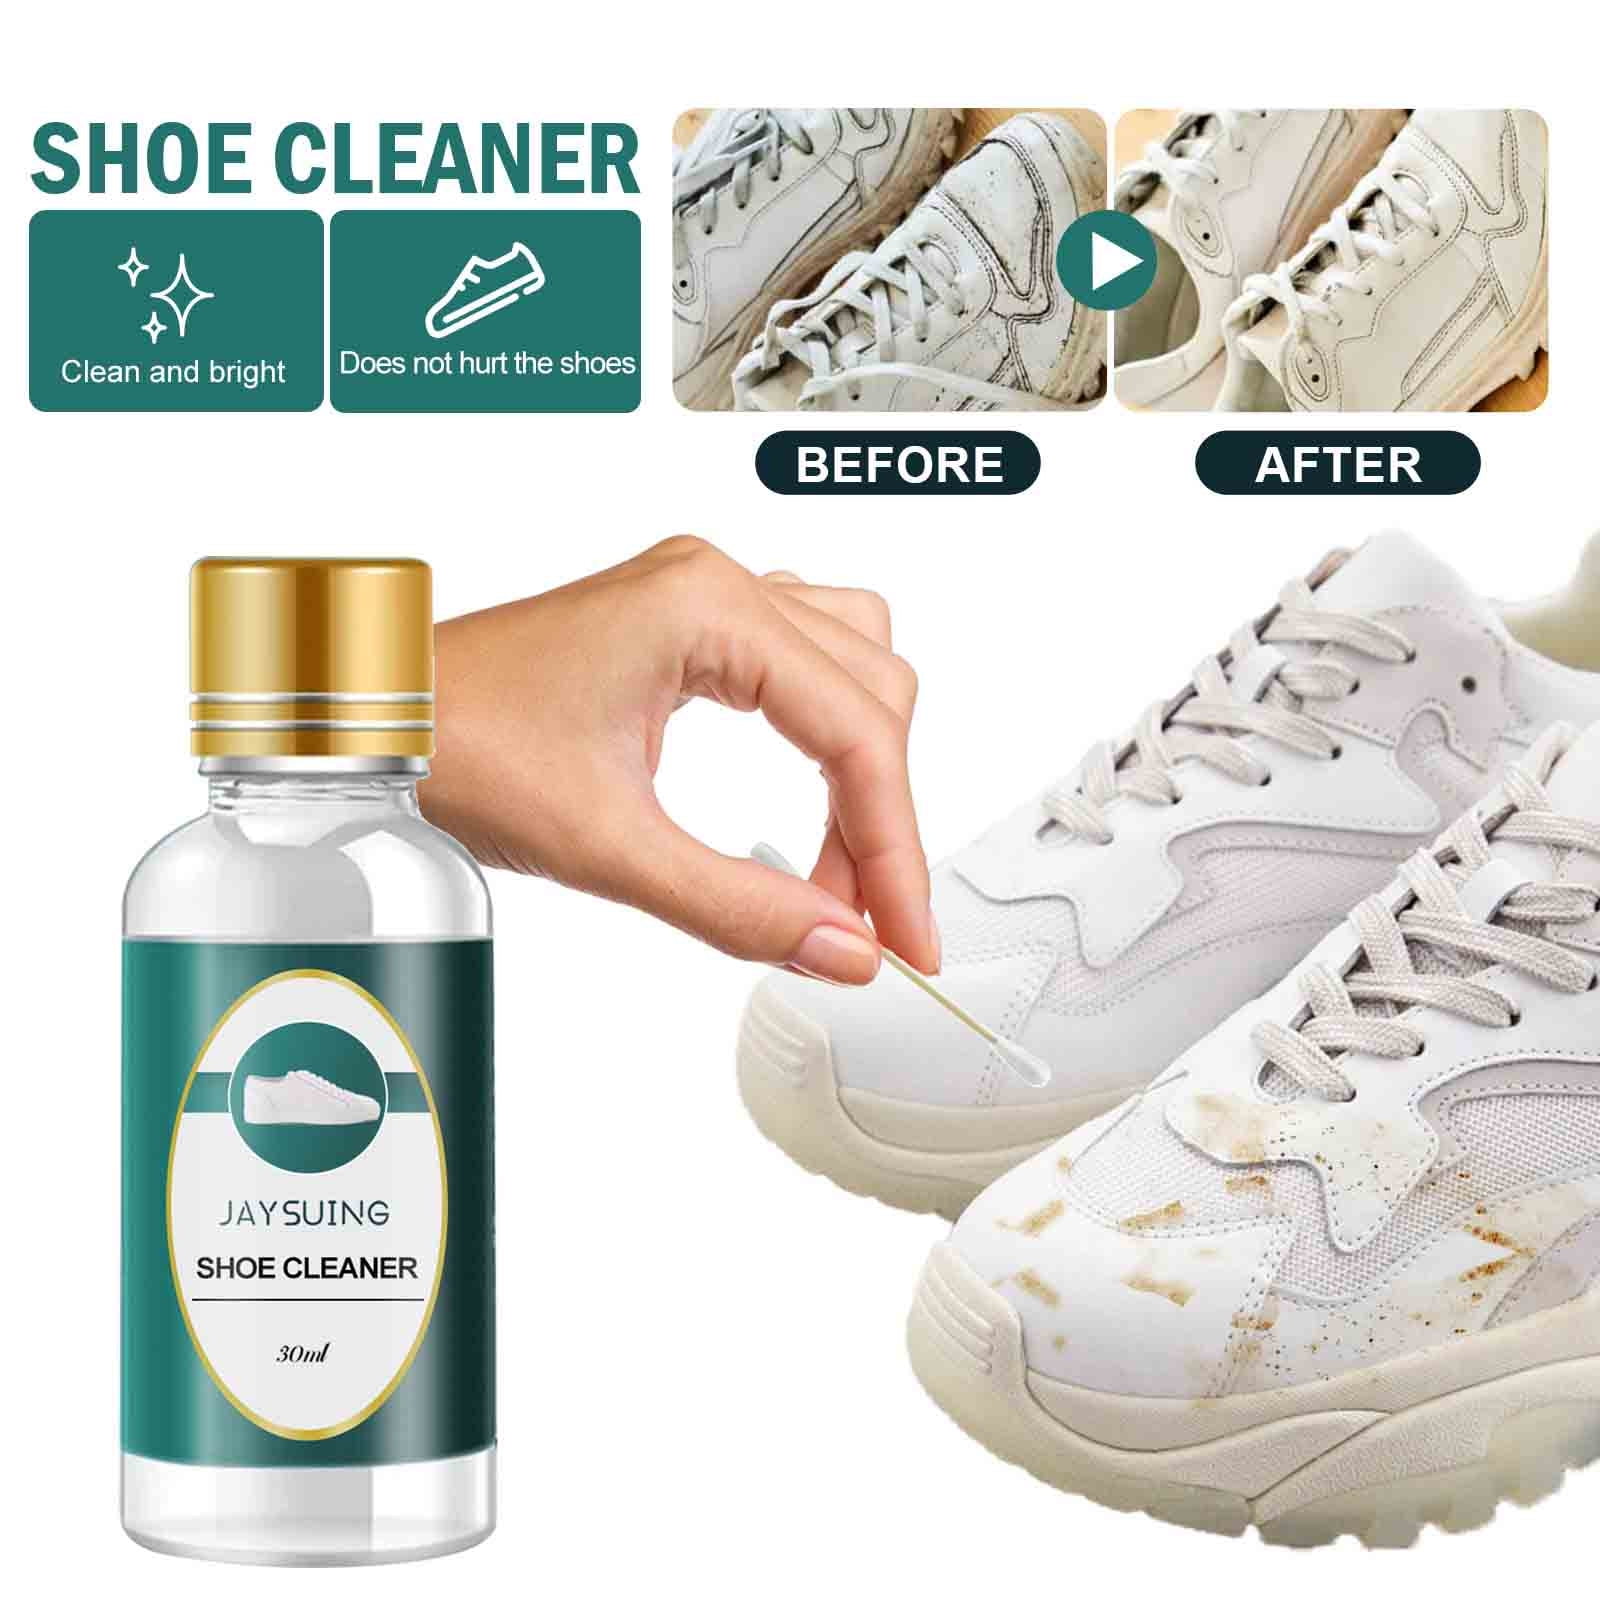 White Shoe Cleaner,Shoe Cleaner Foam,Shoe Cleaner Sneakers Kit fo for  Shoes, Boots, Handbags, Car Upholstery, Furniture- Removes Surface Dirt,  Grime